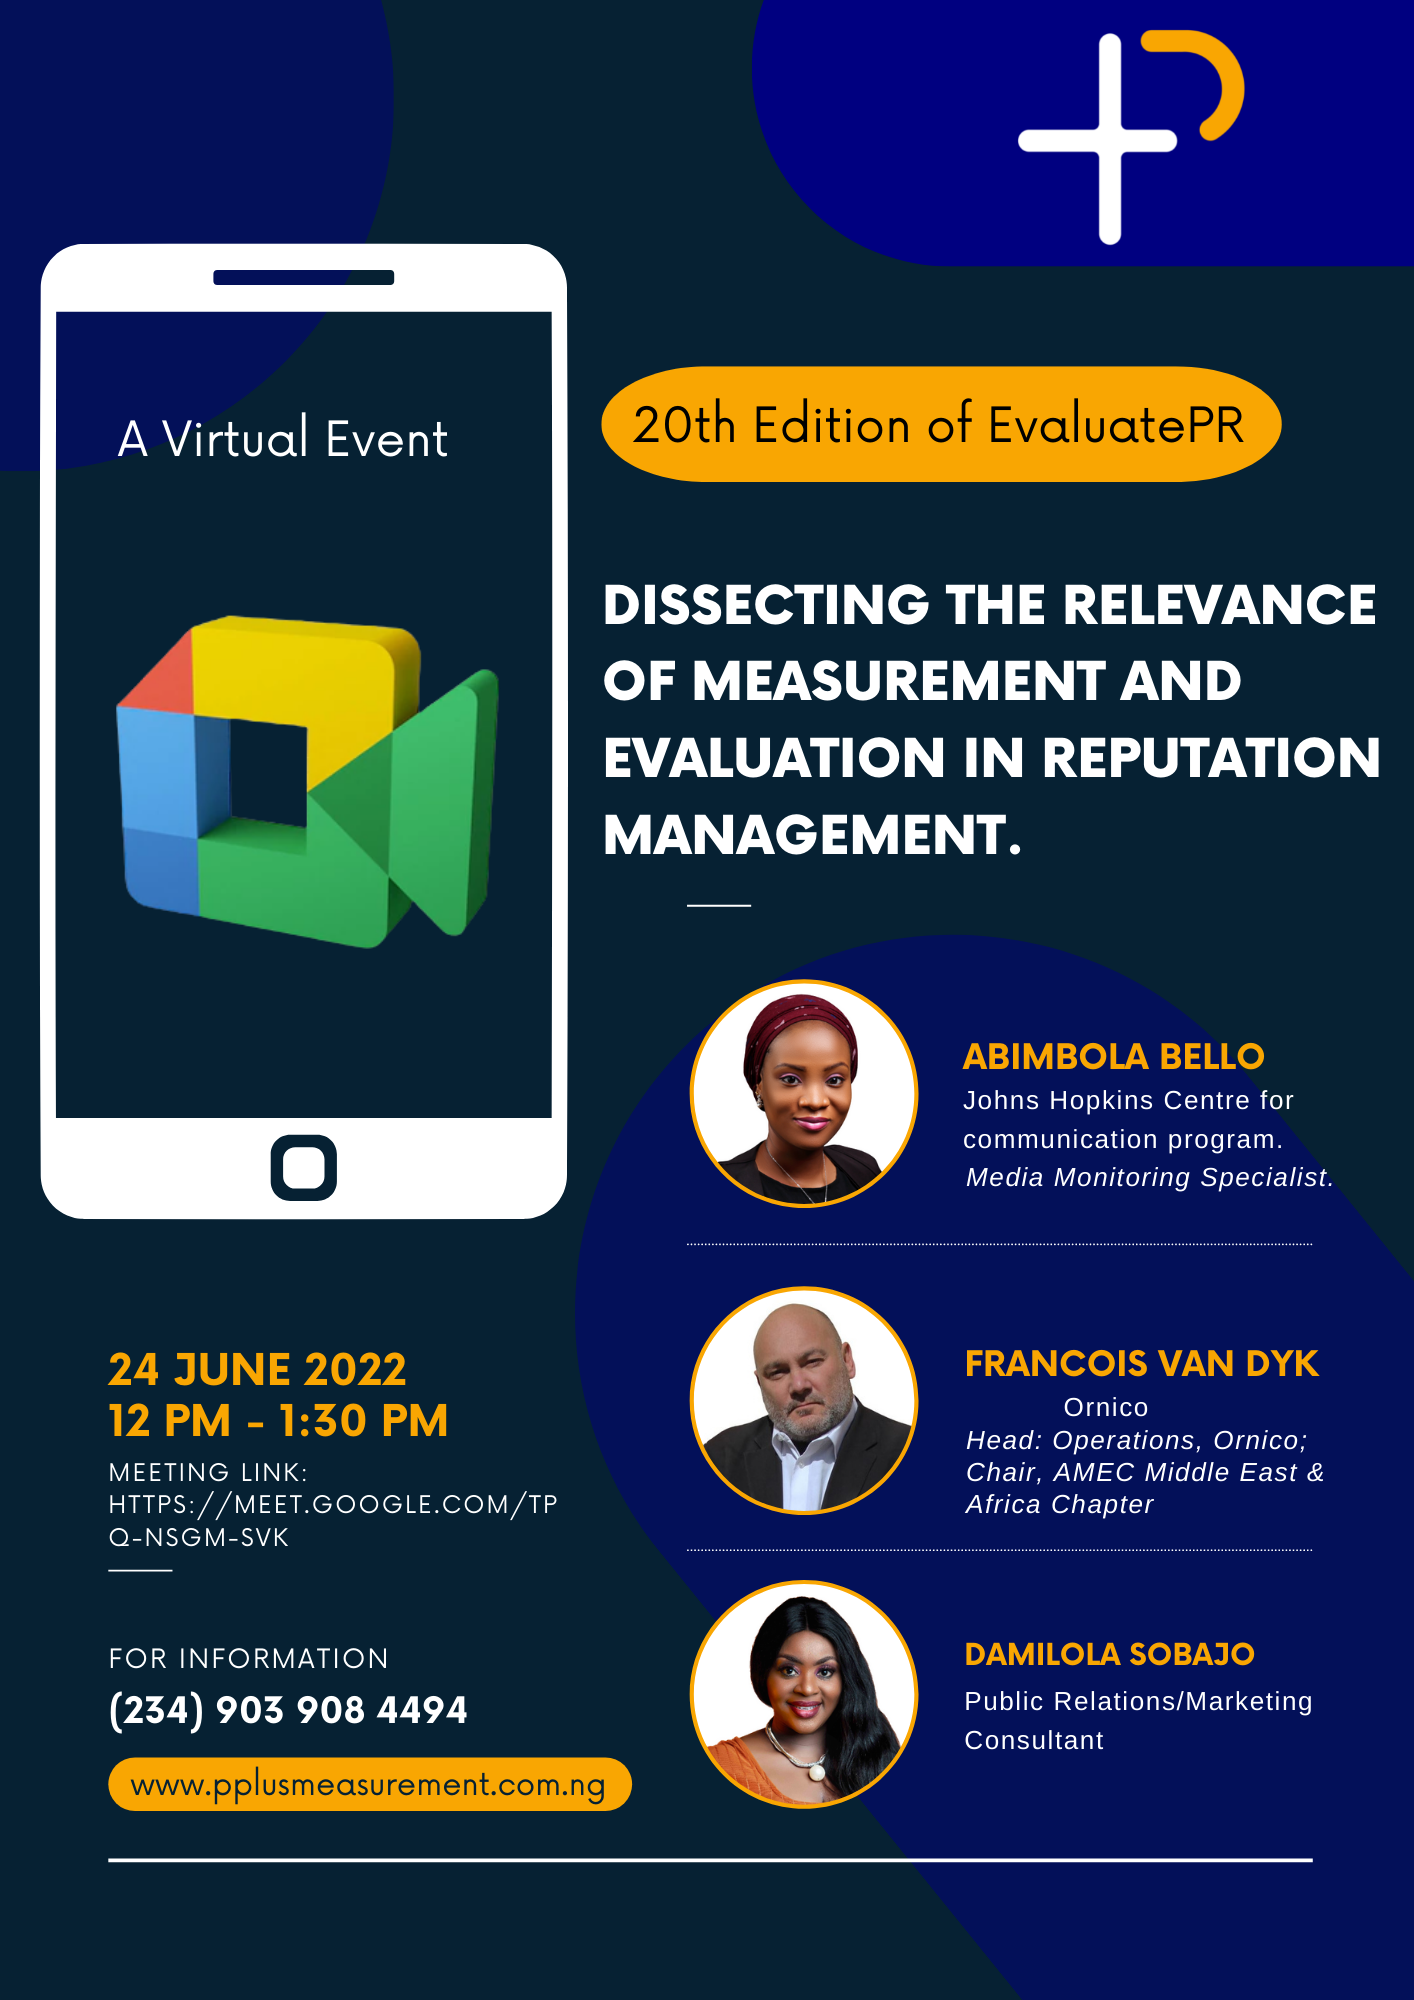 P+ Measurement Services is set to host the 20th Edition of EvaluatePR